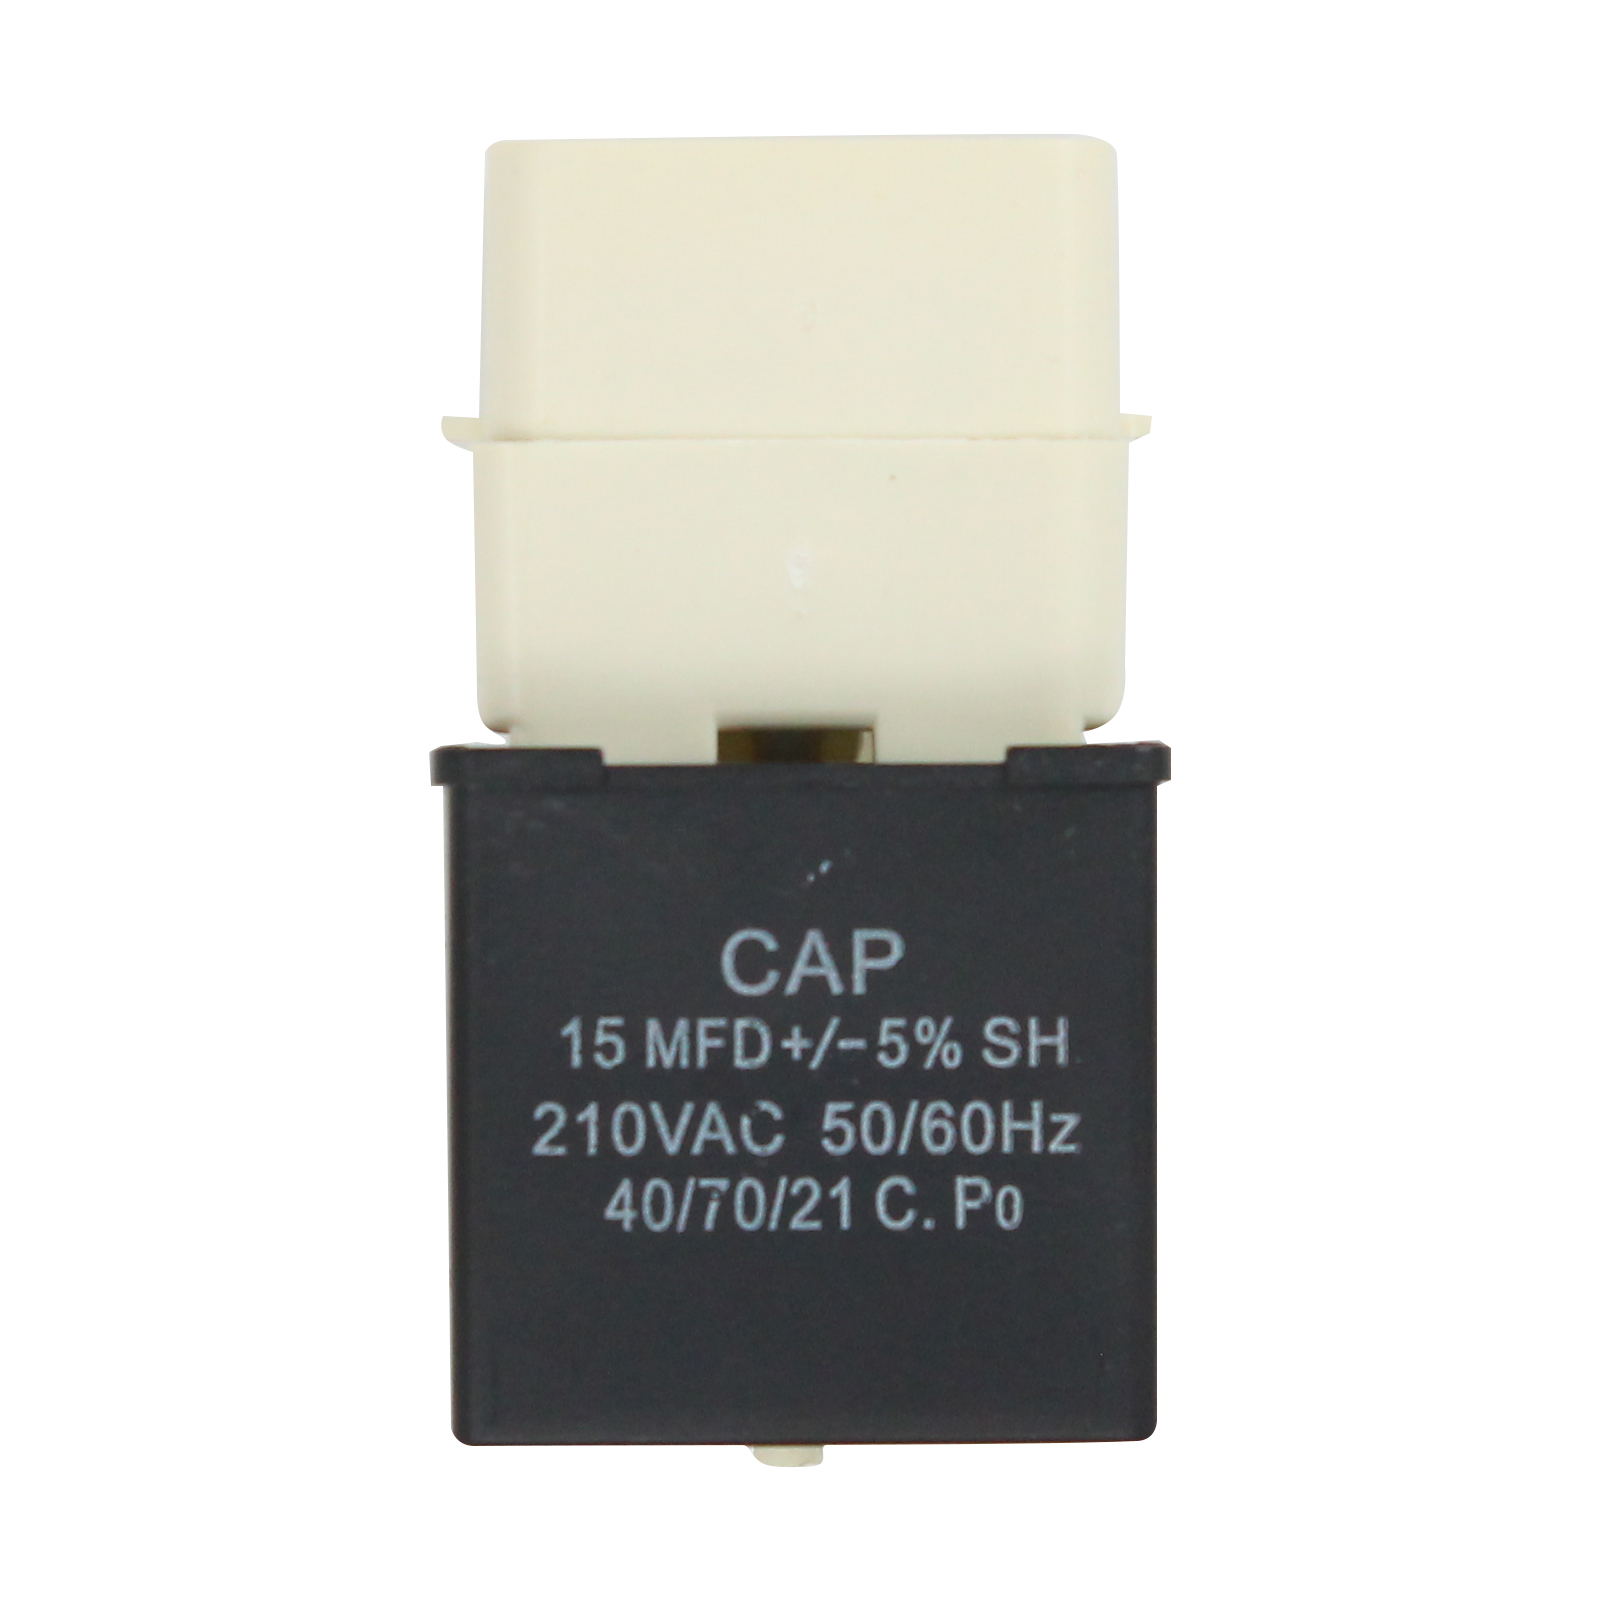 W10613606 Refrigerator Compressor Start Relay & Capacitor Replacement for Amana SSD25NB2L (P1162429W L) Refrigerator - Compatible with W10613606 Start Device Relay Overload With Capacitor - image 2 of 4